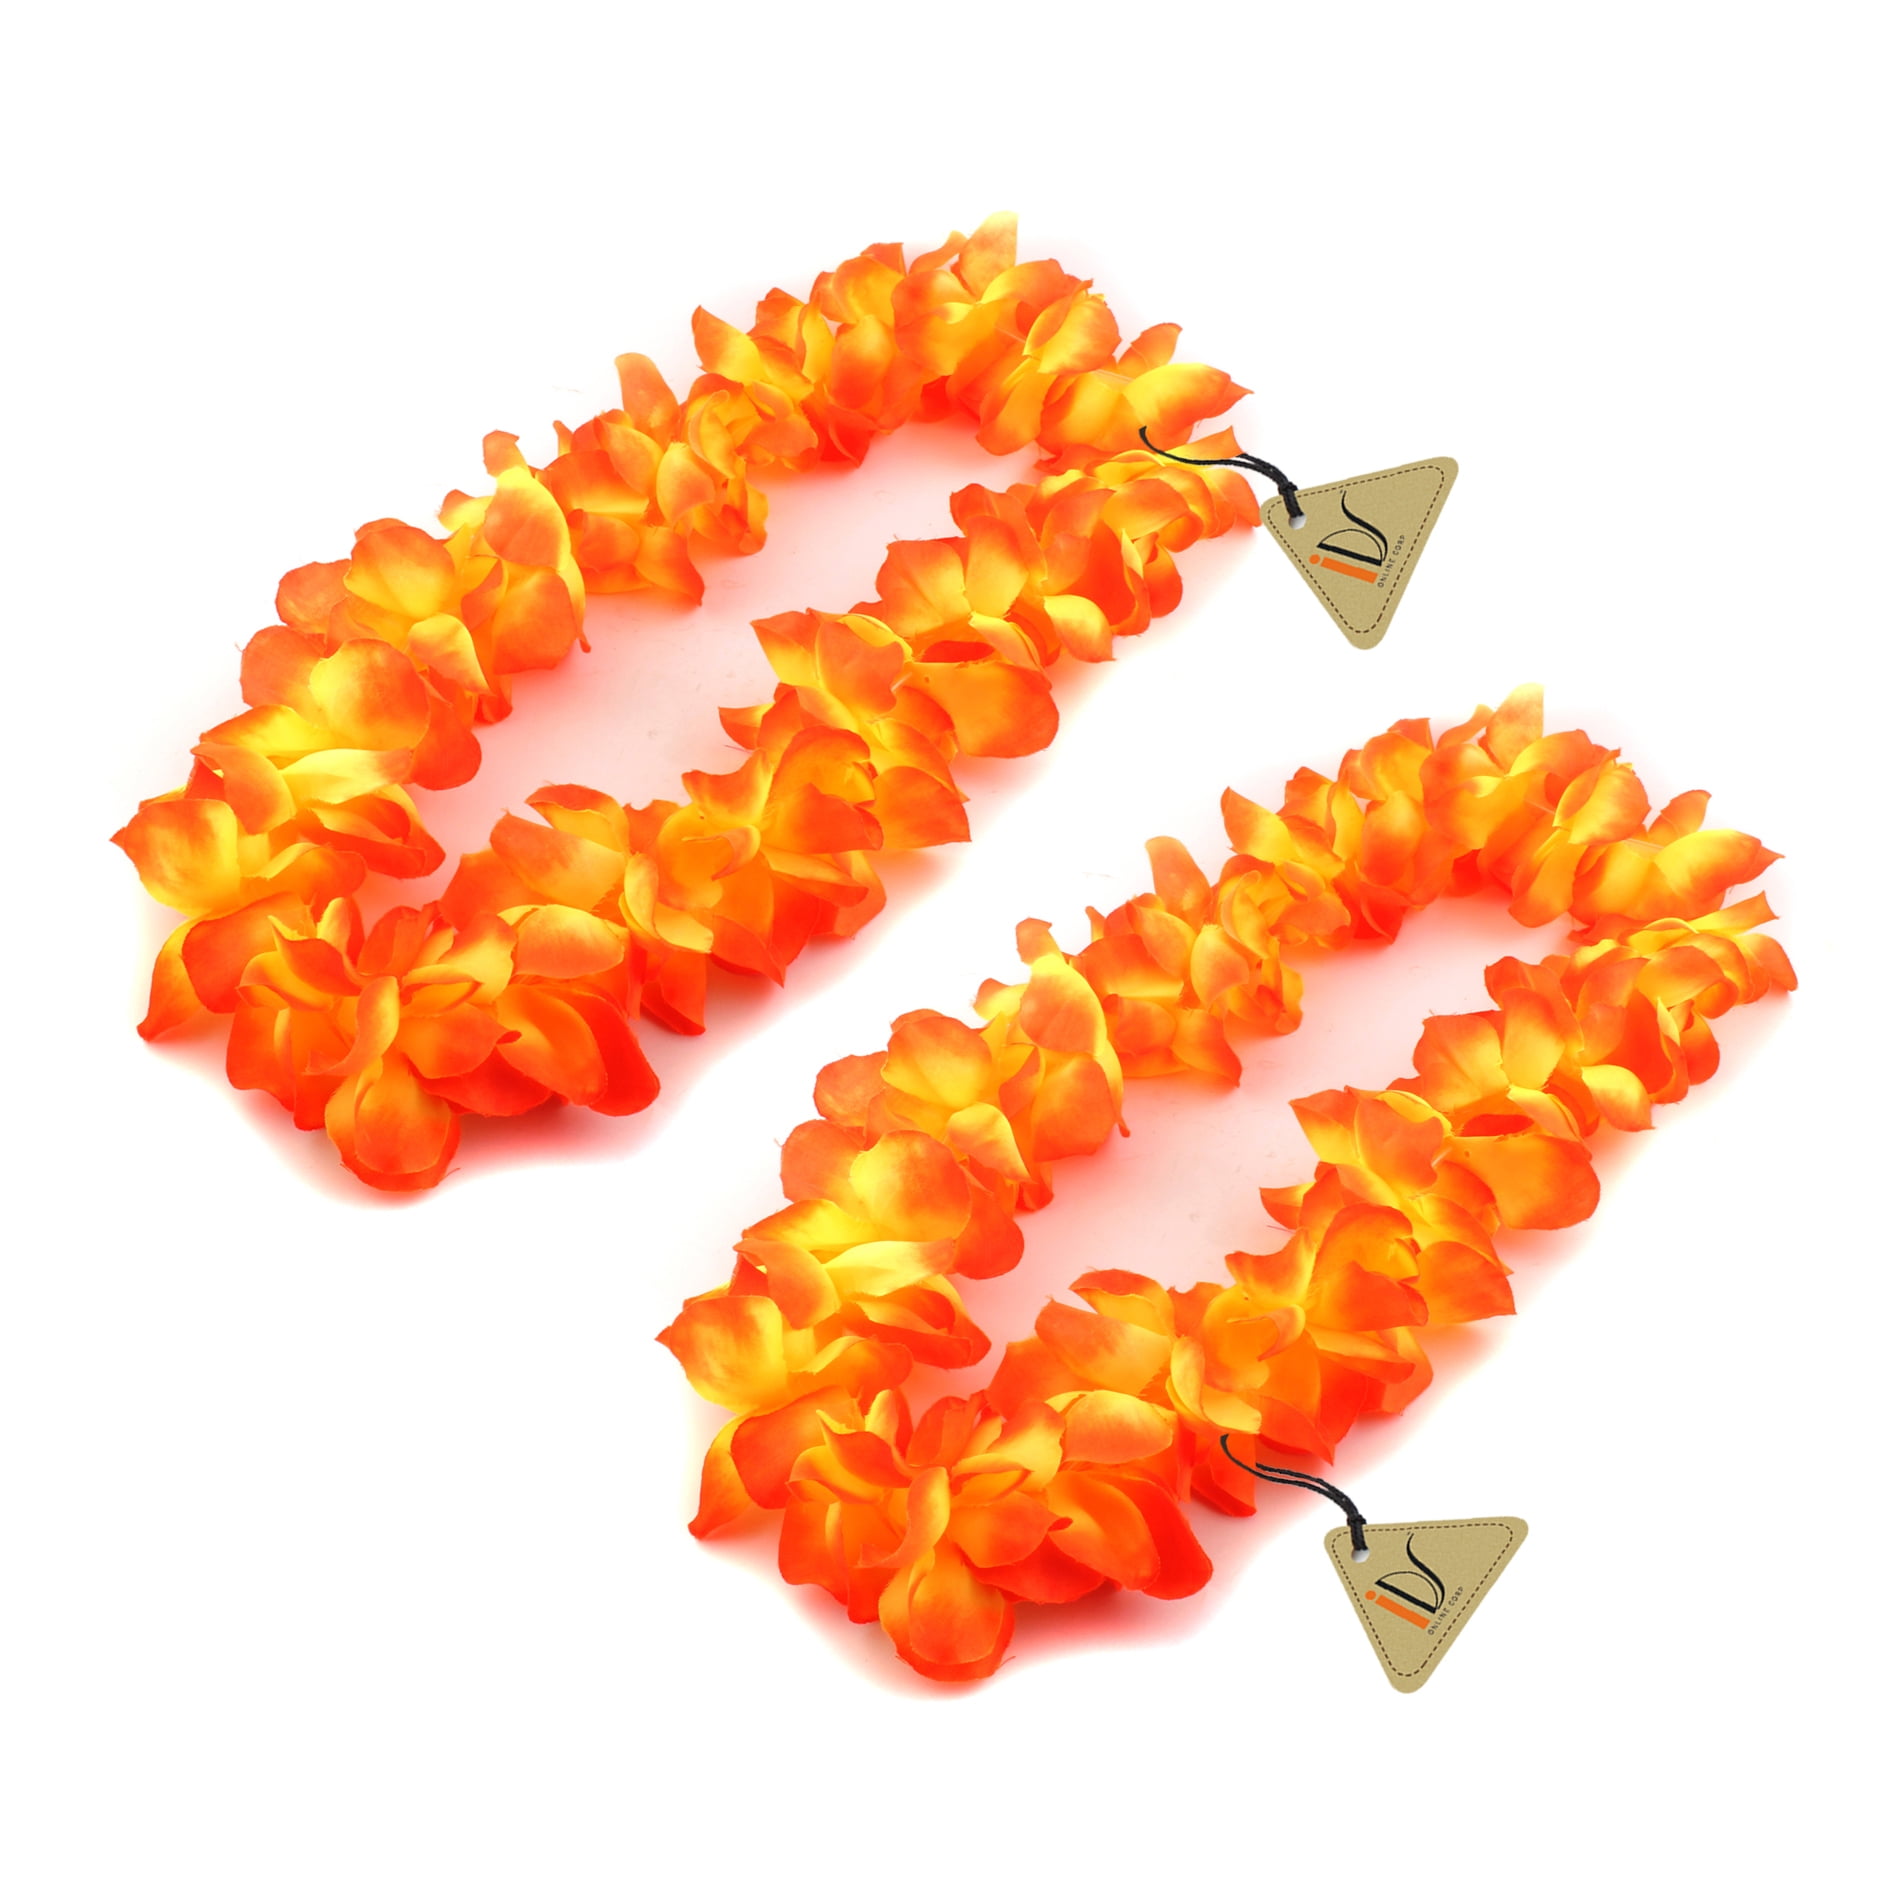 Idealgo pack of 4 Luau Silk Flower Leis Necklaces Tropical Island Beach Theme Party Event Supplies Hawaiian Silk Flower Leis Novelty Luau Hula Party Supplies ACC